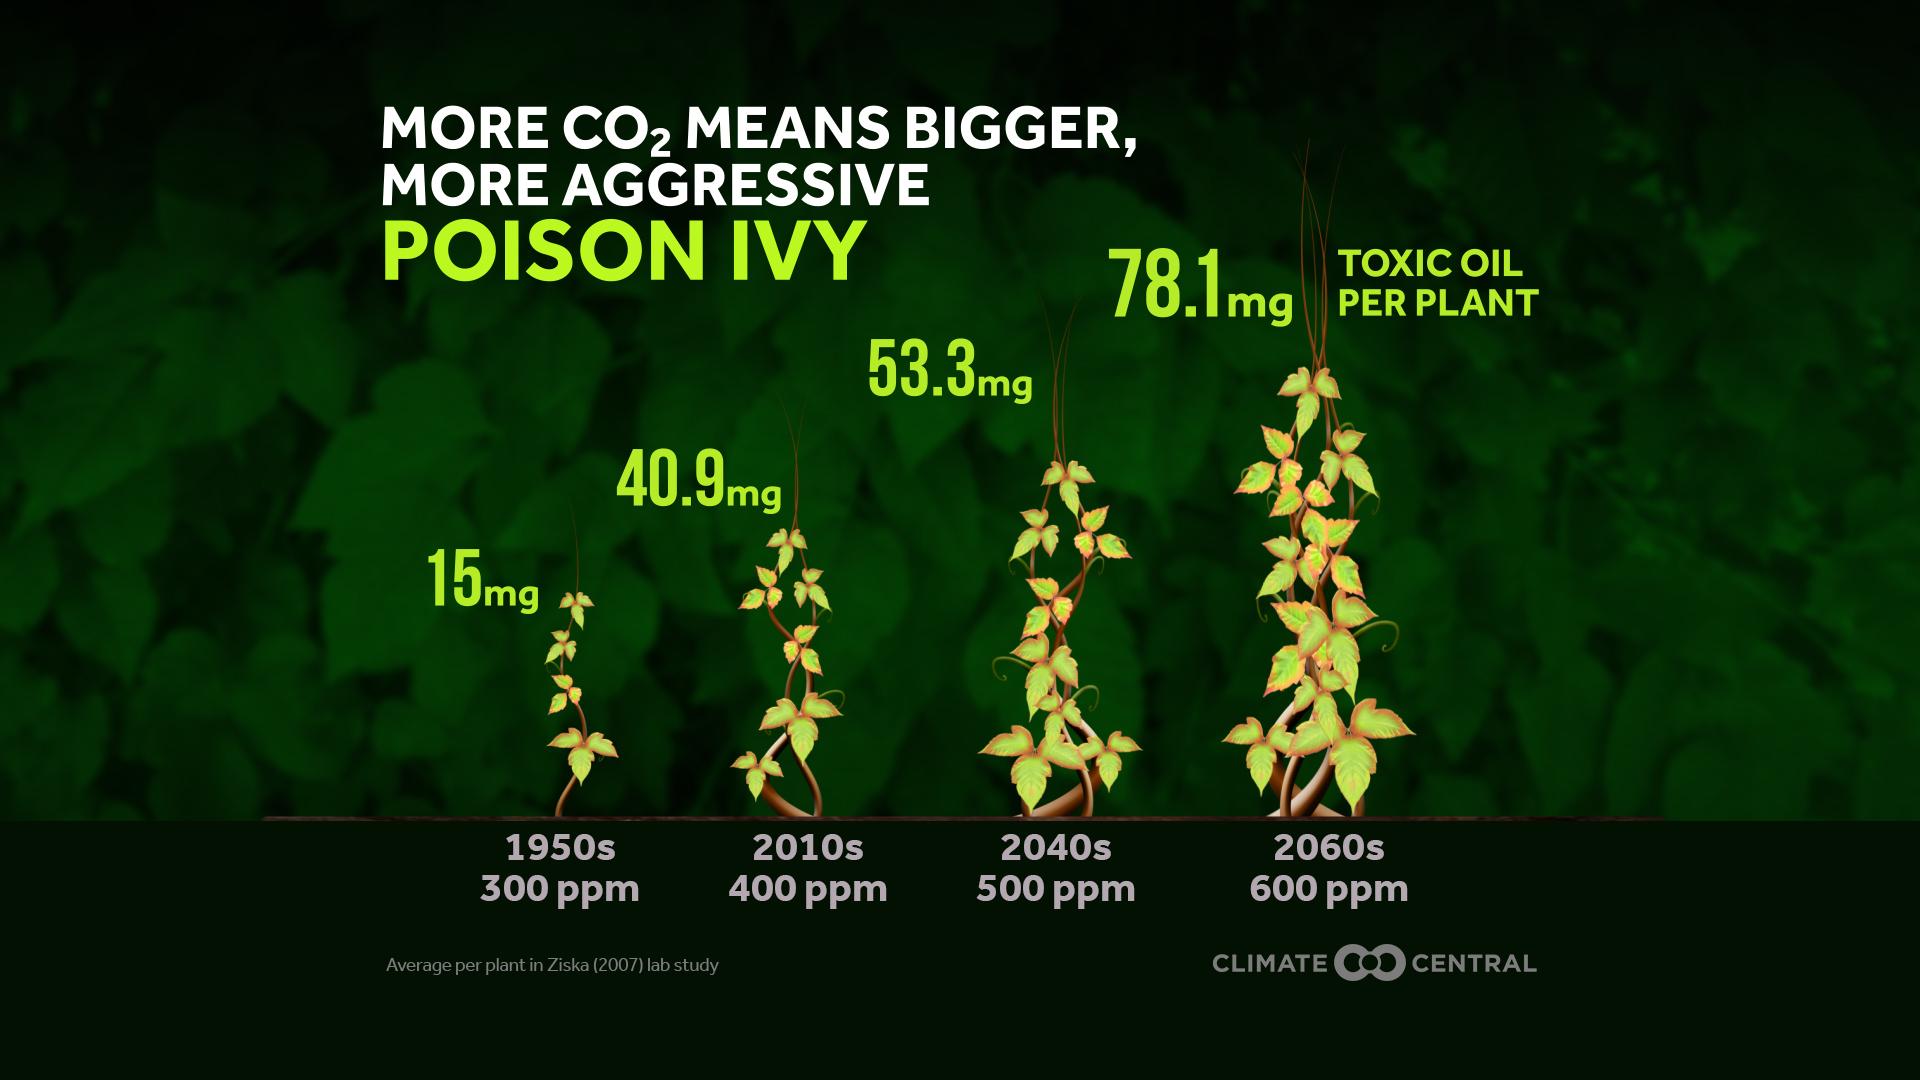 Effect of Elevated CO2 on Poison Ivy - Hiking Hazards: Ticks and Poison Ivy